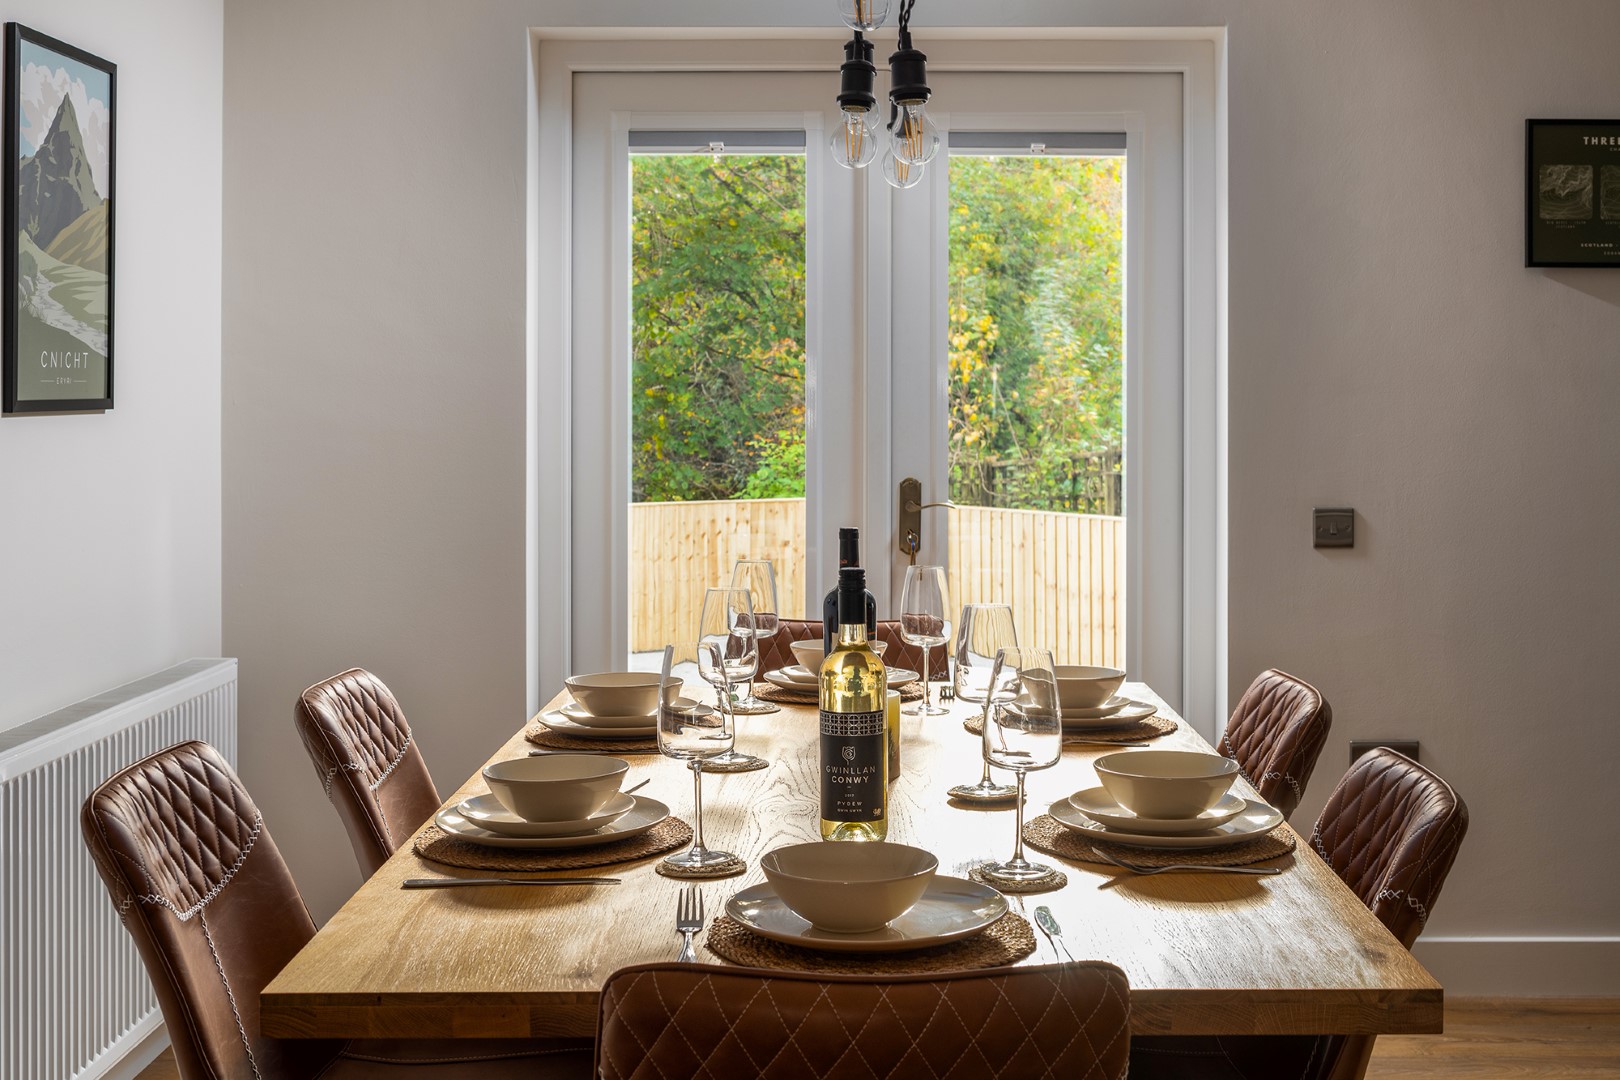 "Image of a beautifully set dinner table with plates, cutlery, and glasses, ready for a delicious meal at Coed Gelert holiday cottages in Snowdonia.